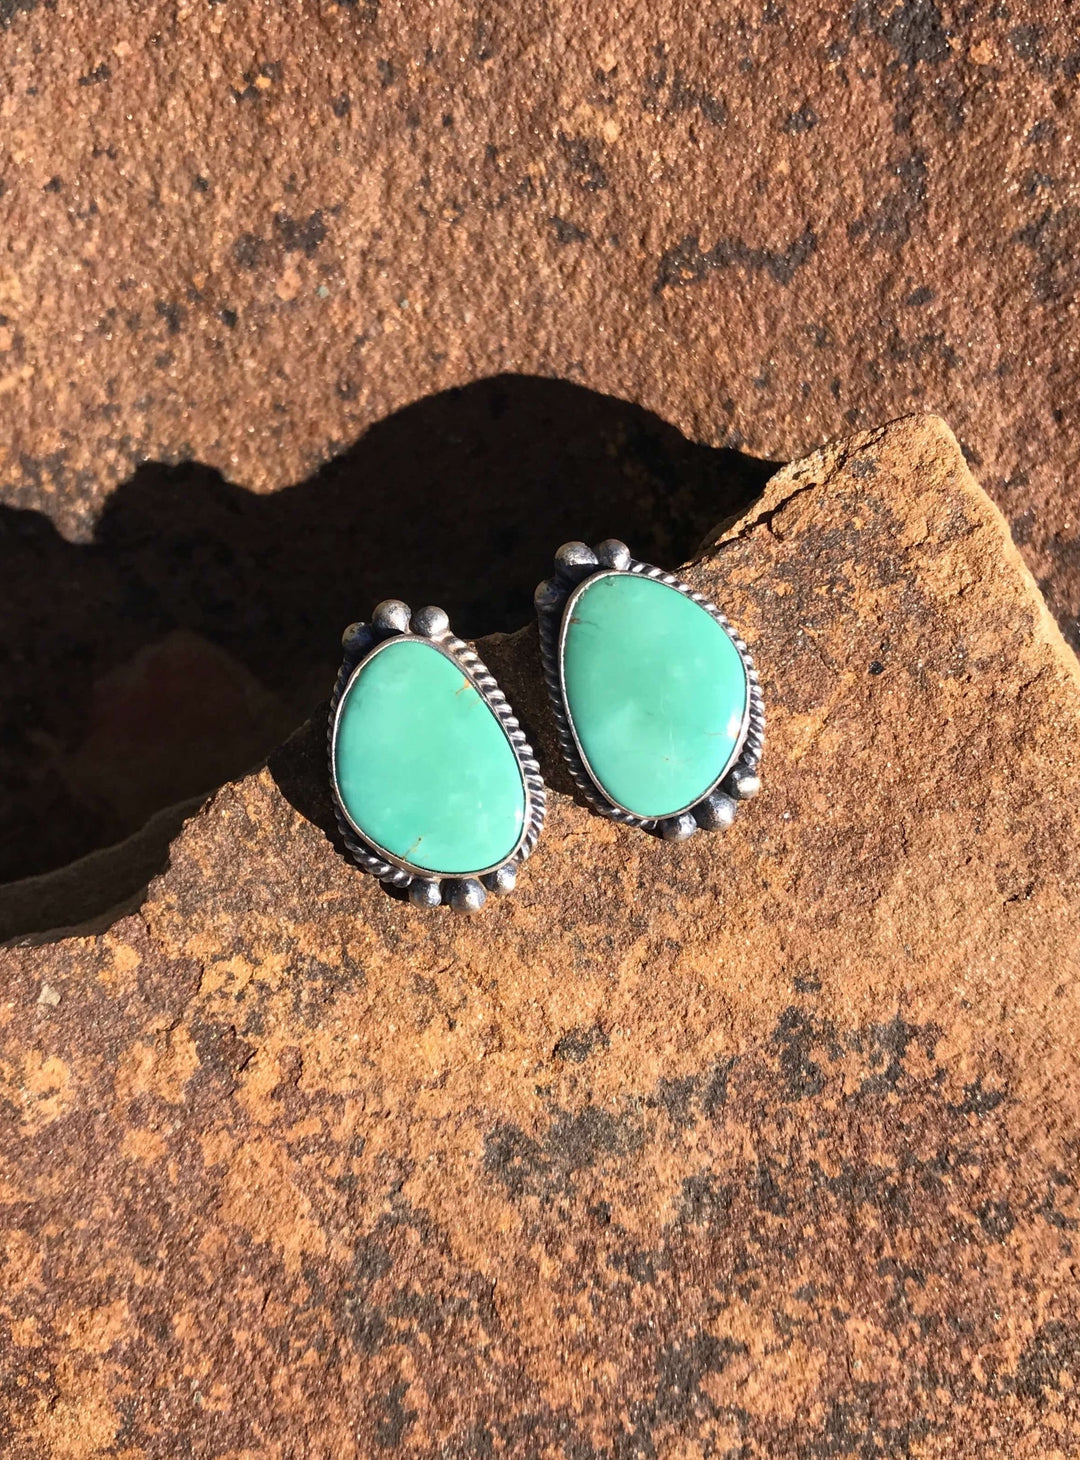 The Turquoise Studs, 10-Earrings-Calli Co., Turquoise and Silver Jewelry, Native American Handmade, Zuni Tribe, Navajo Tribe, Brock Texas